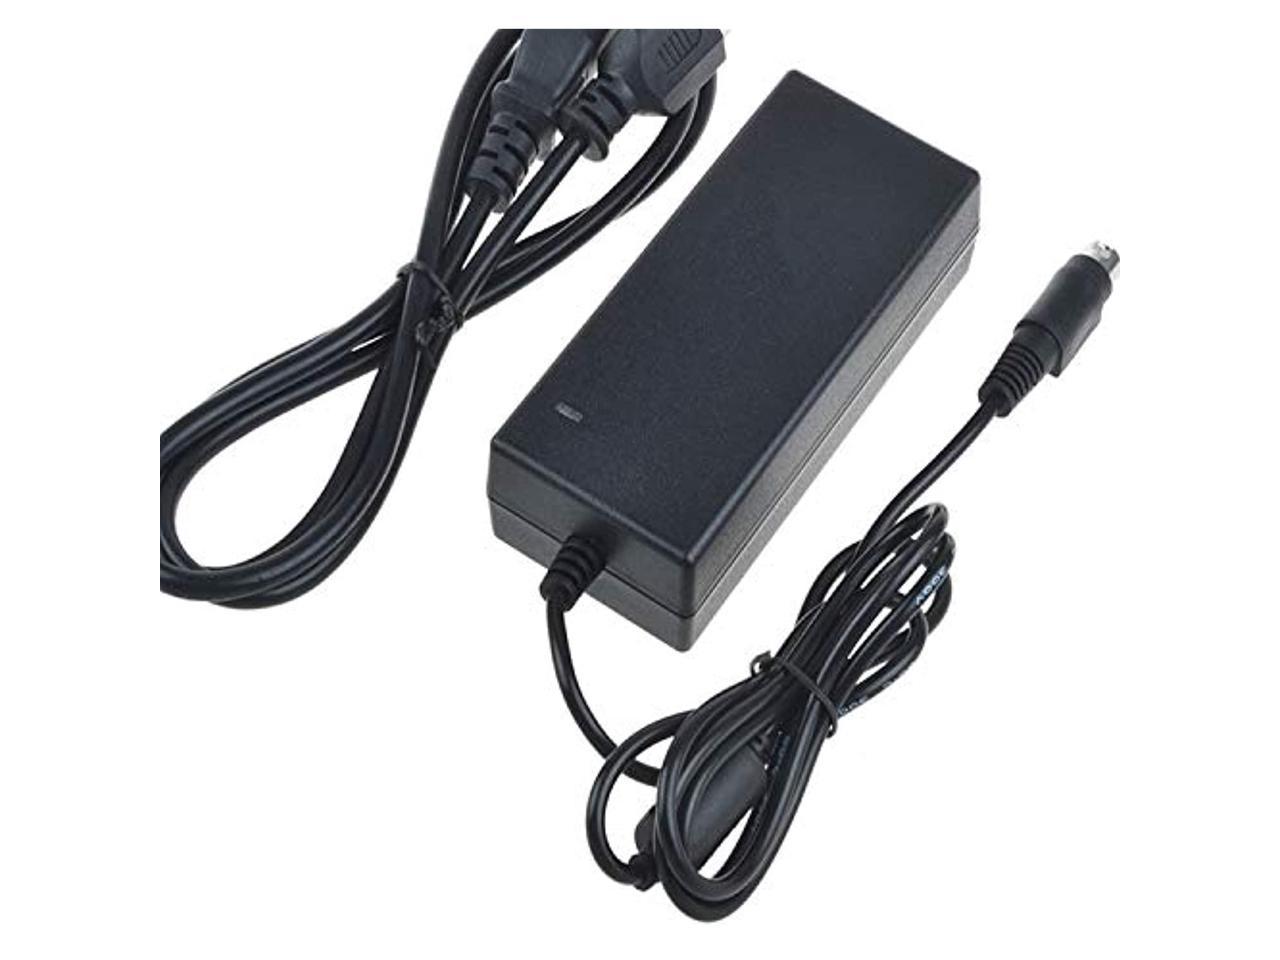 12V 5A AC-DC Adapter Charger for Data model SPV-1250 1250 Power Supply Cord PSU Features Portable Manufacturer Warranty - Click Image to Close